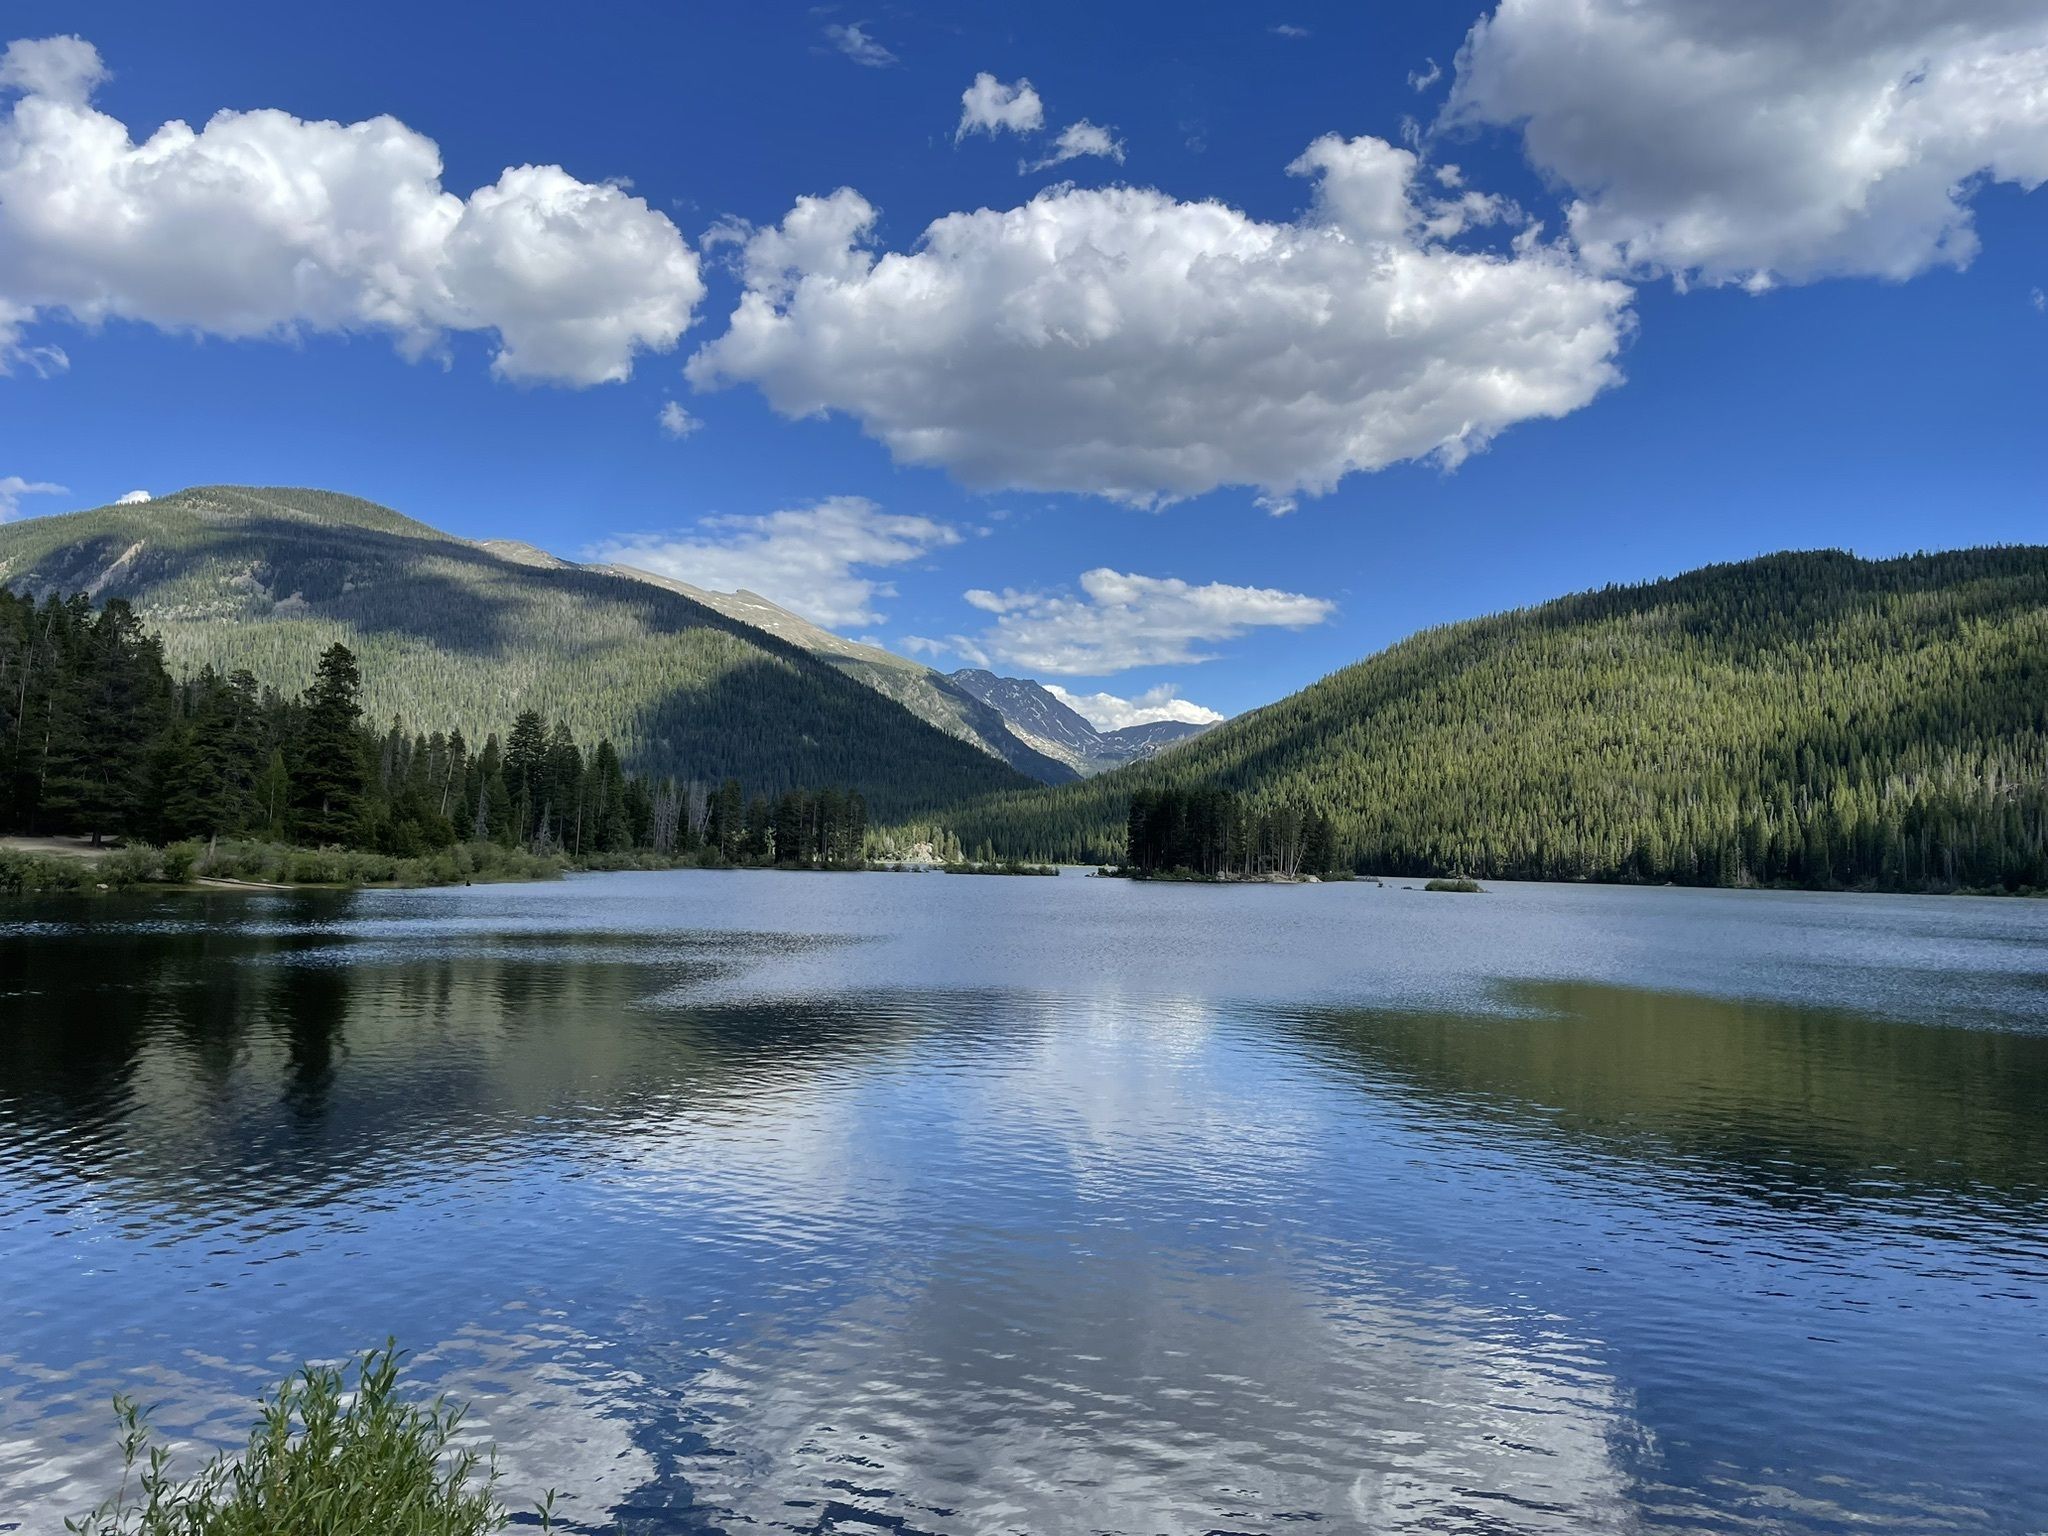 Photos of Indian Peaks Wilderness, Colorado fishing trails